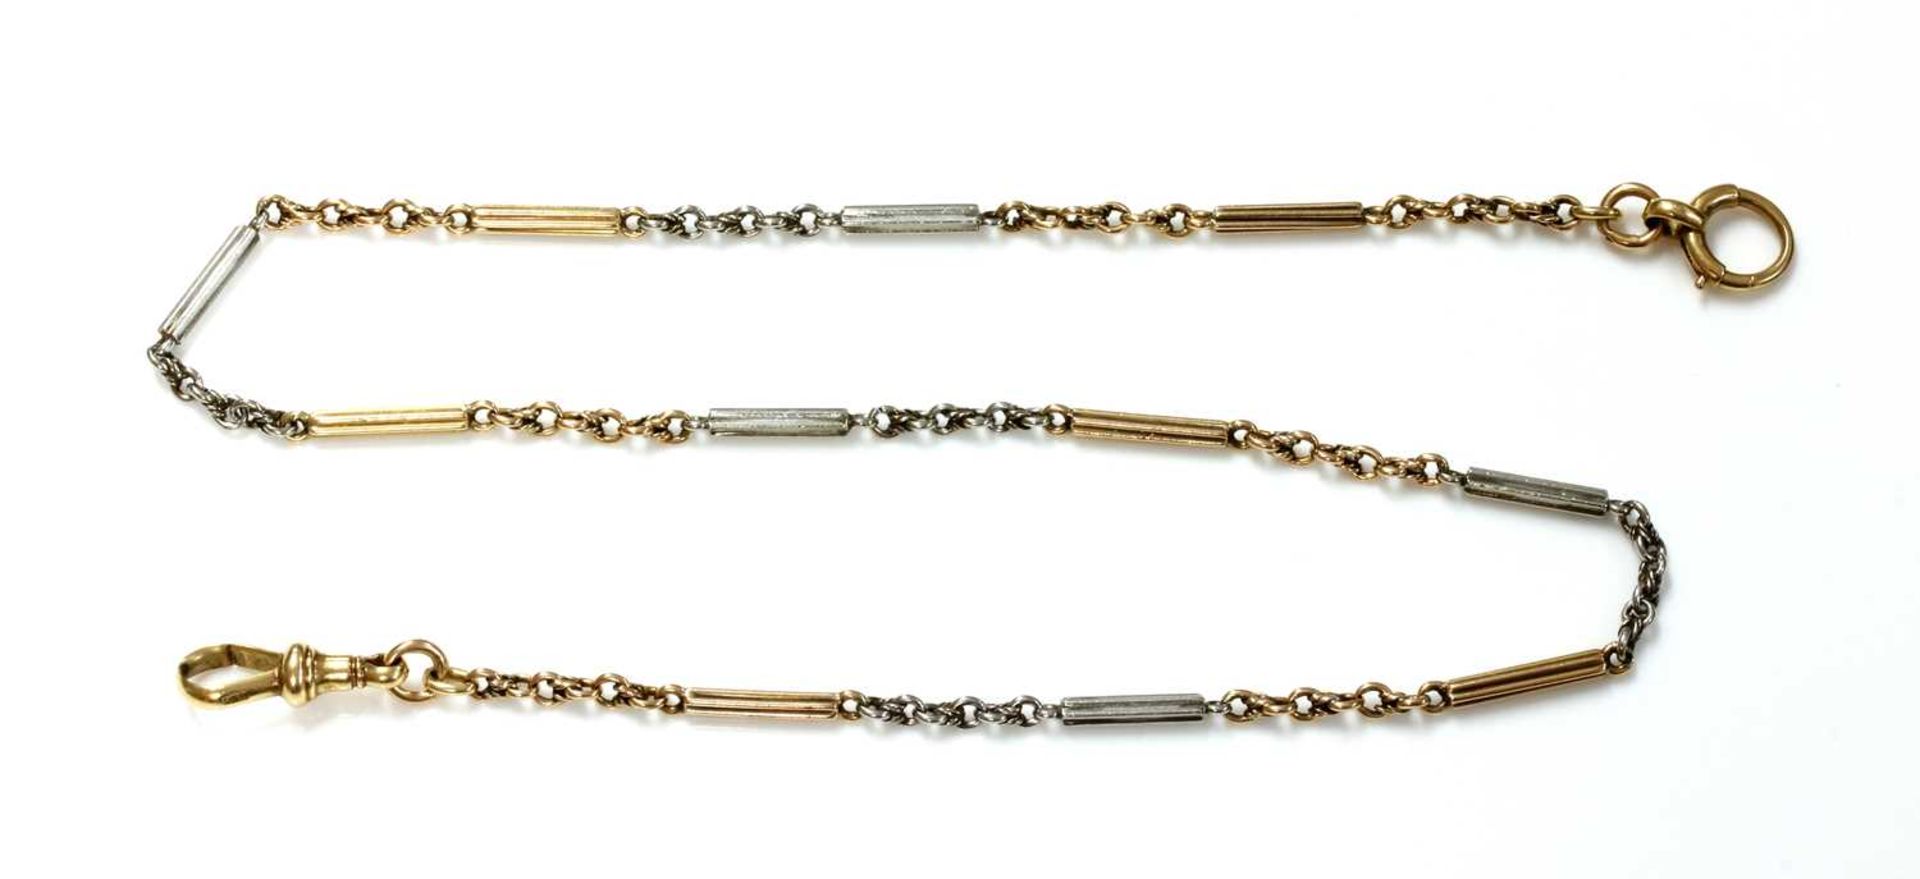 An early 20th century two colour gold alternating yellow and white bar and knot link watch chain,